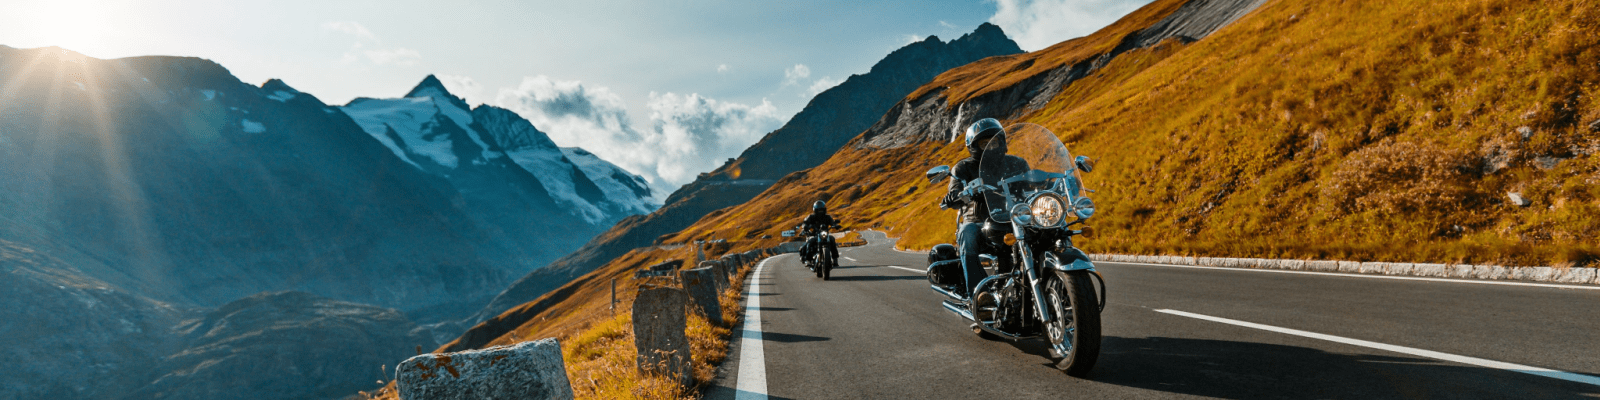 Motorcycle Insurance in Texas